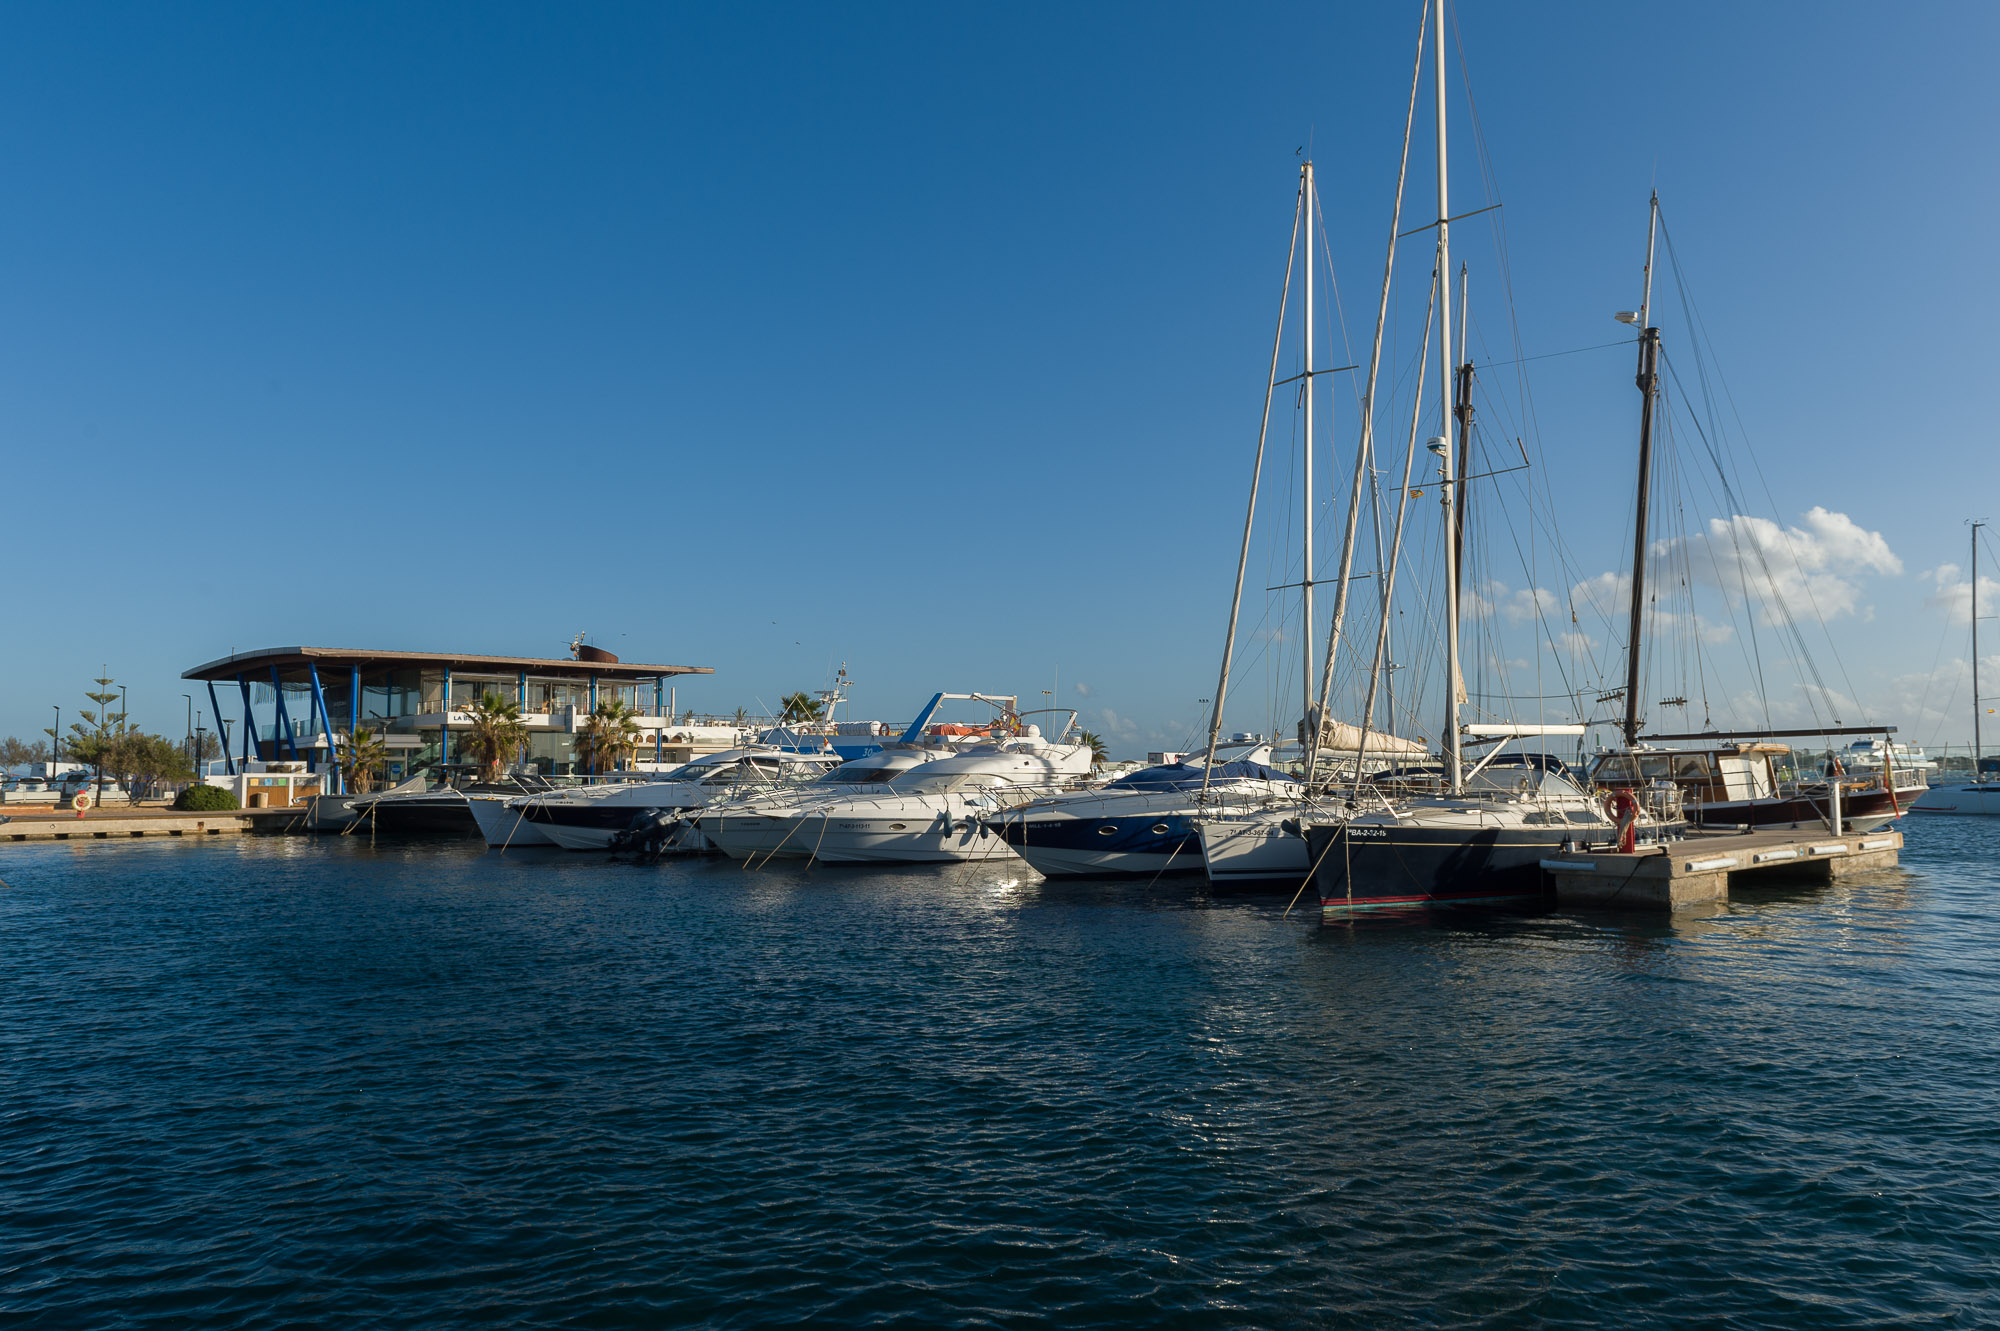 The APB’s Board of Directors has approved a good environmental practices agreement with Marina La Savina